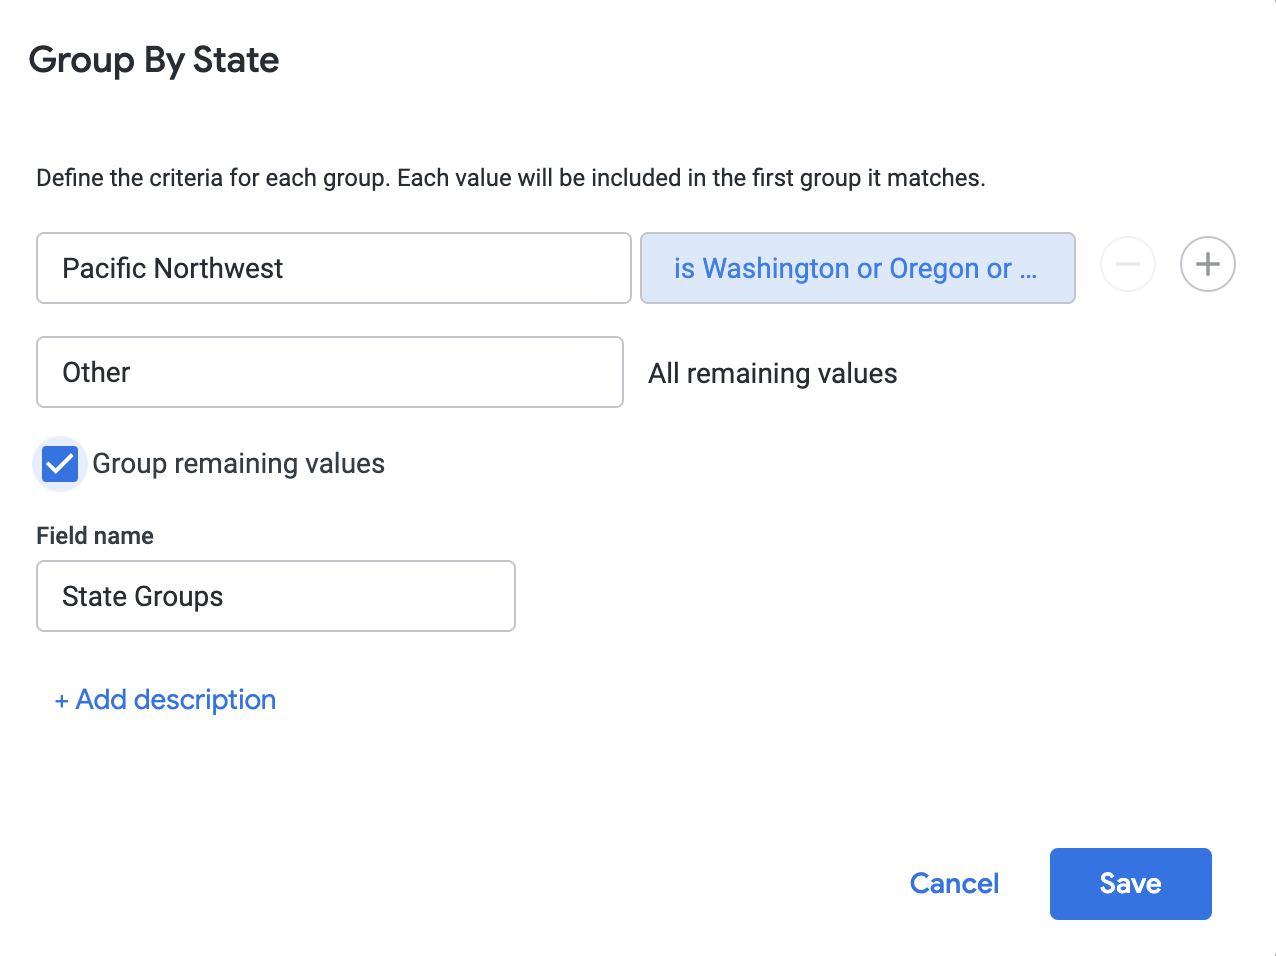 Group By State dialog box